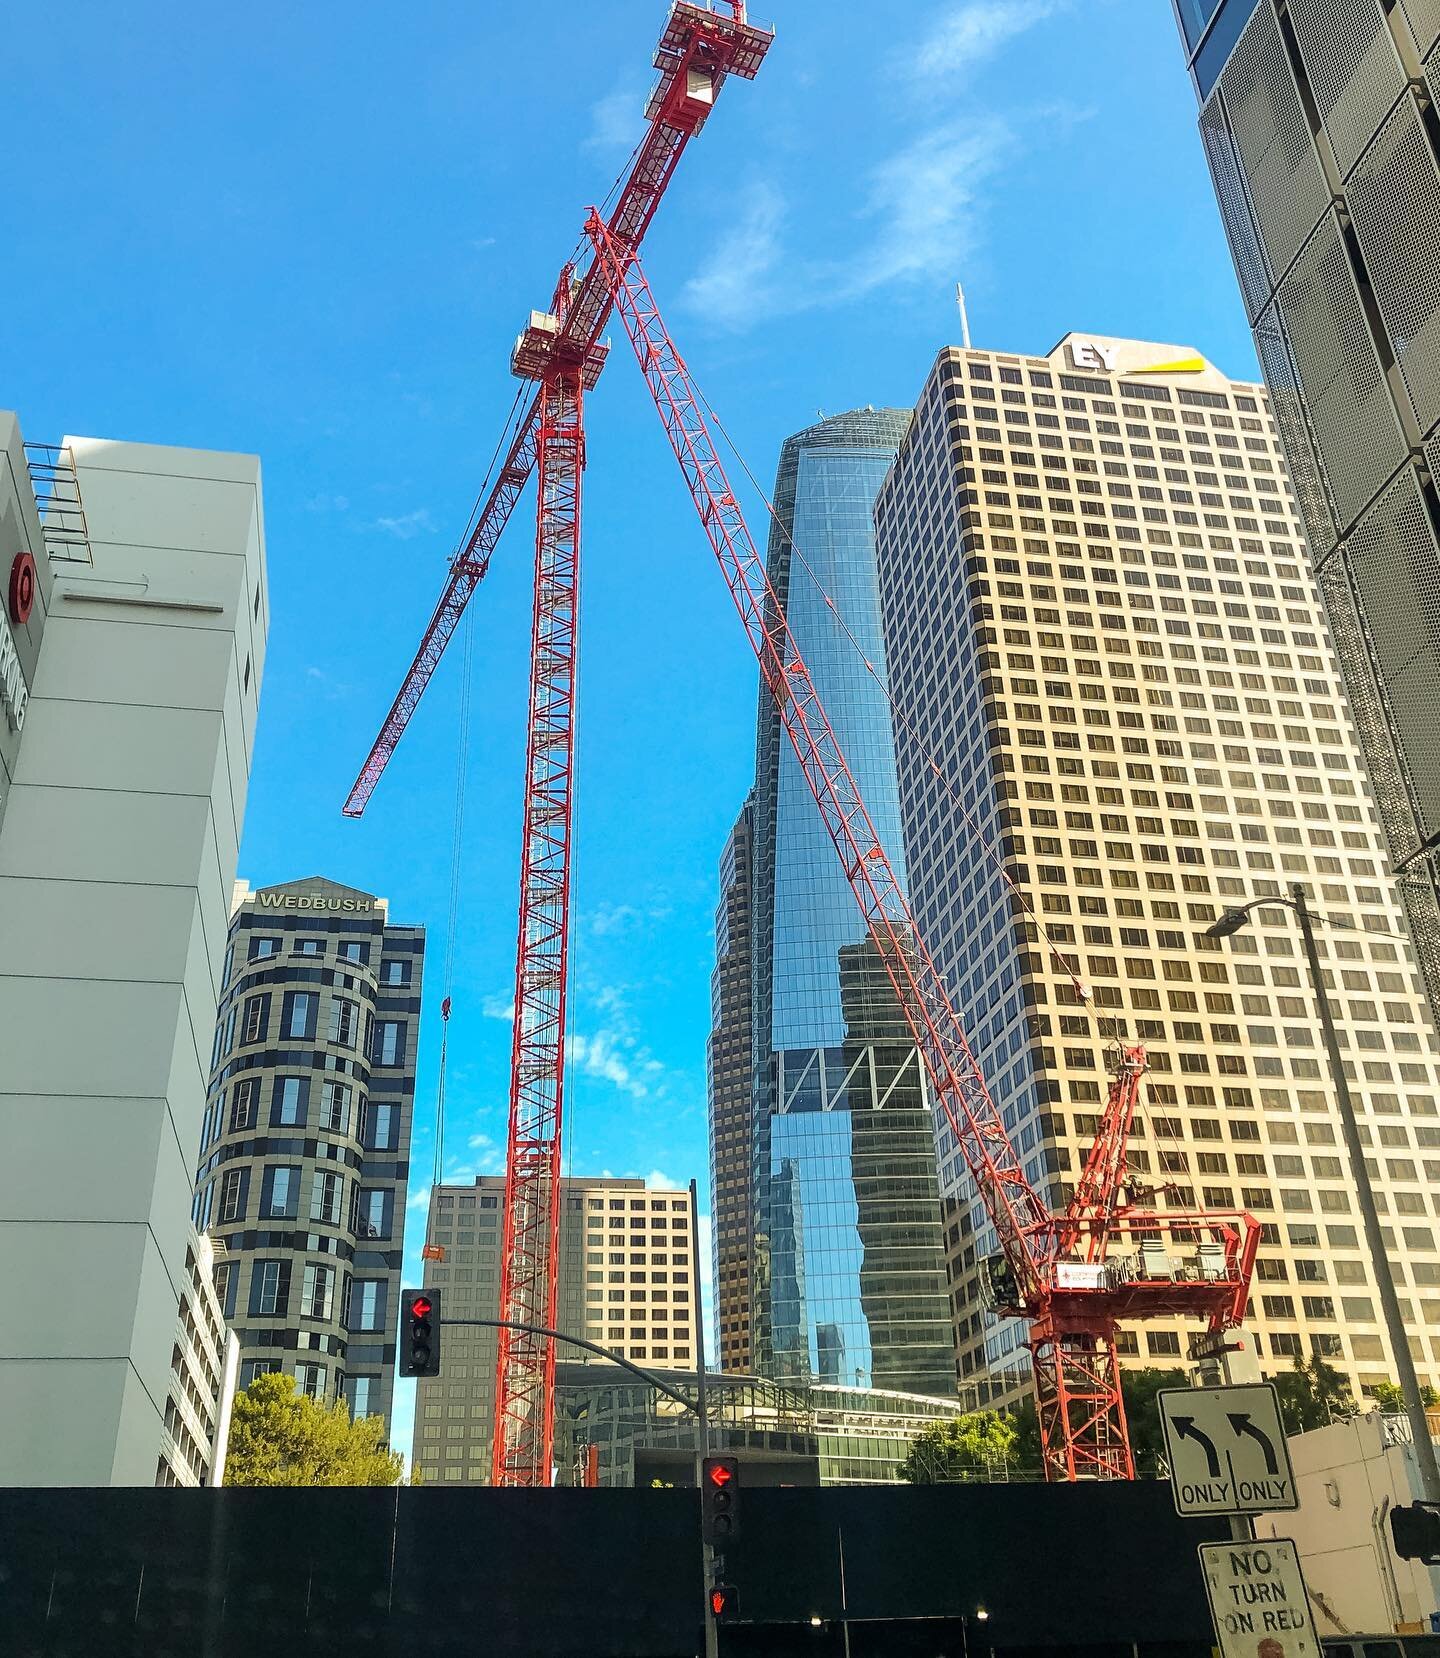 Starting construction on a high rise? We can help bring temporary and permanent power to your project site, plan where to stage construction equipment, coordinate timelines and more! 🏗